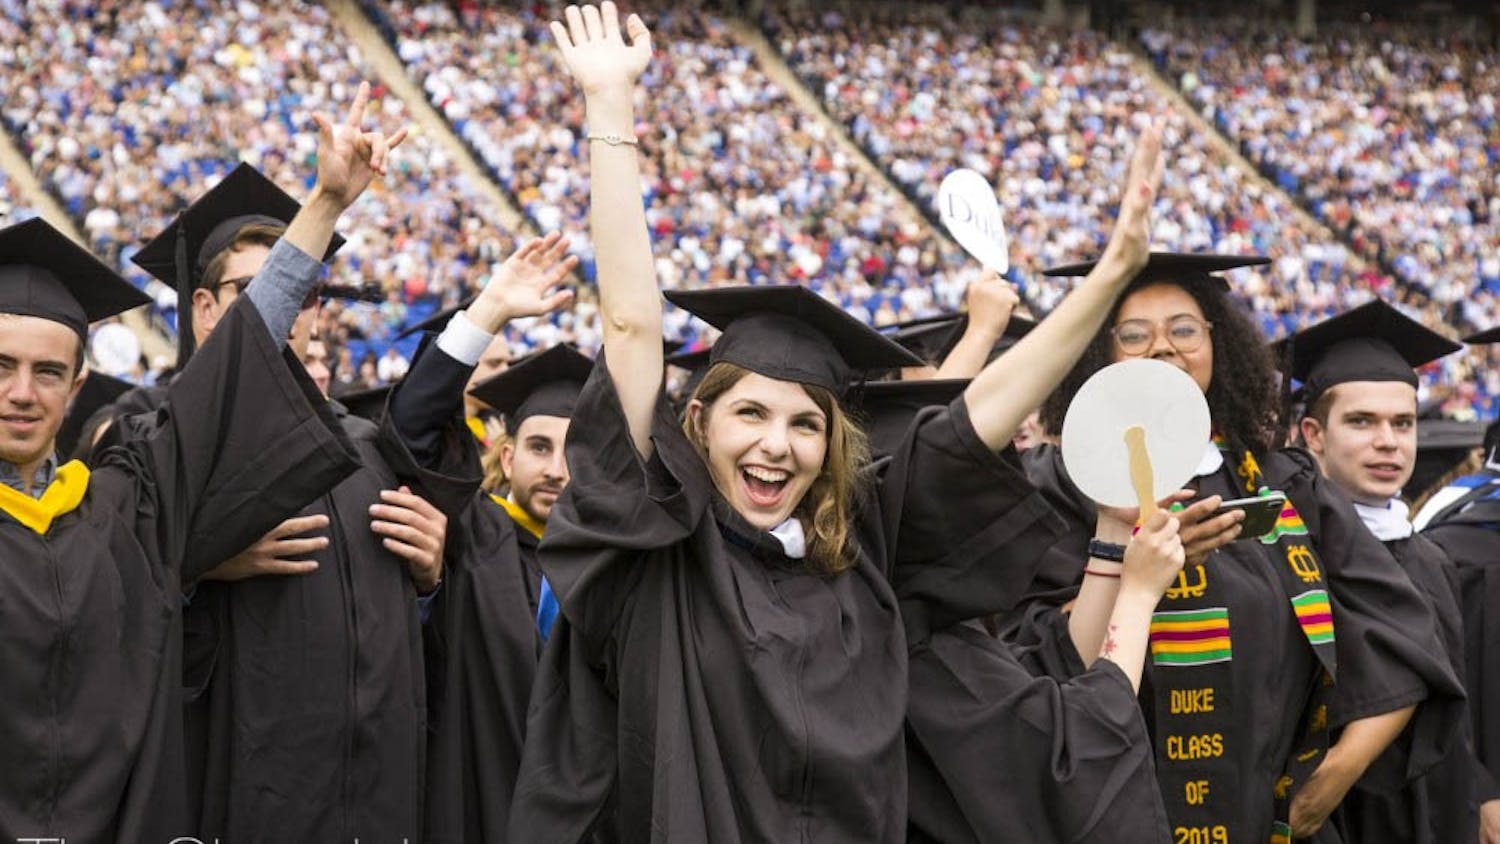 Students celebrate at Duke's commencement ceremony in 2019.